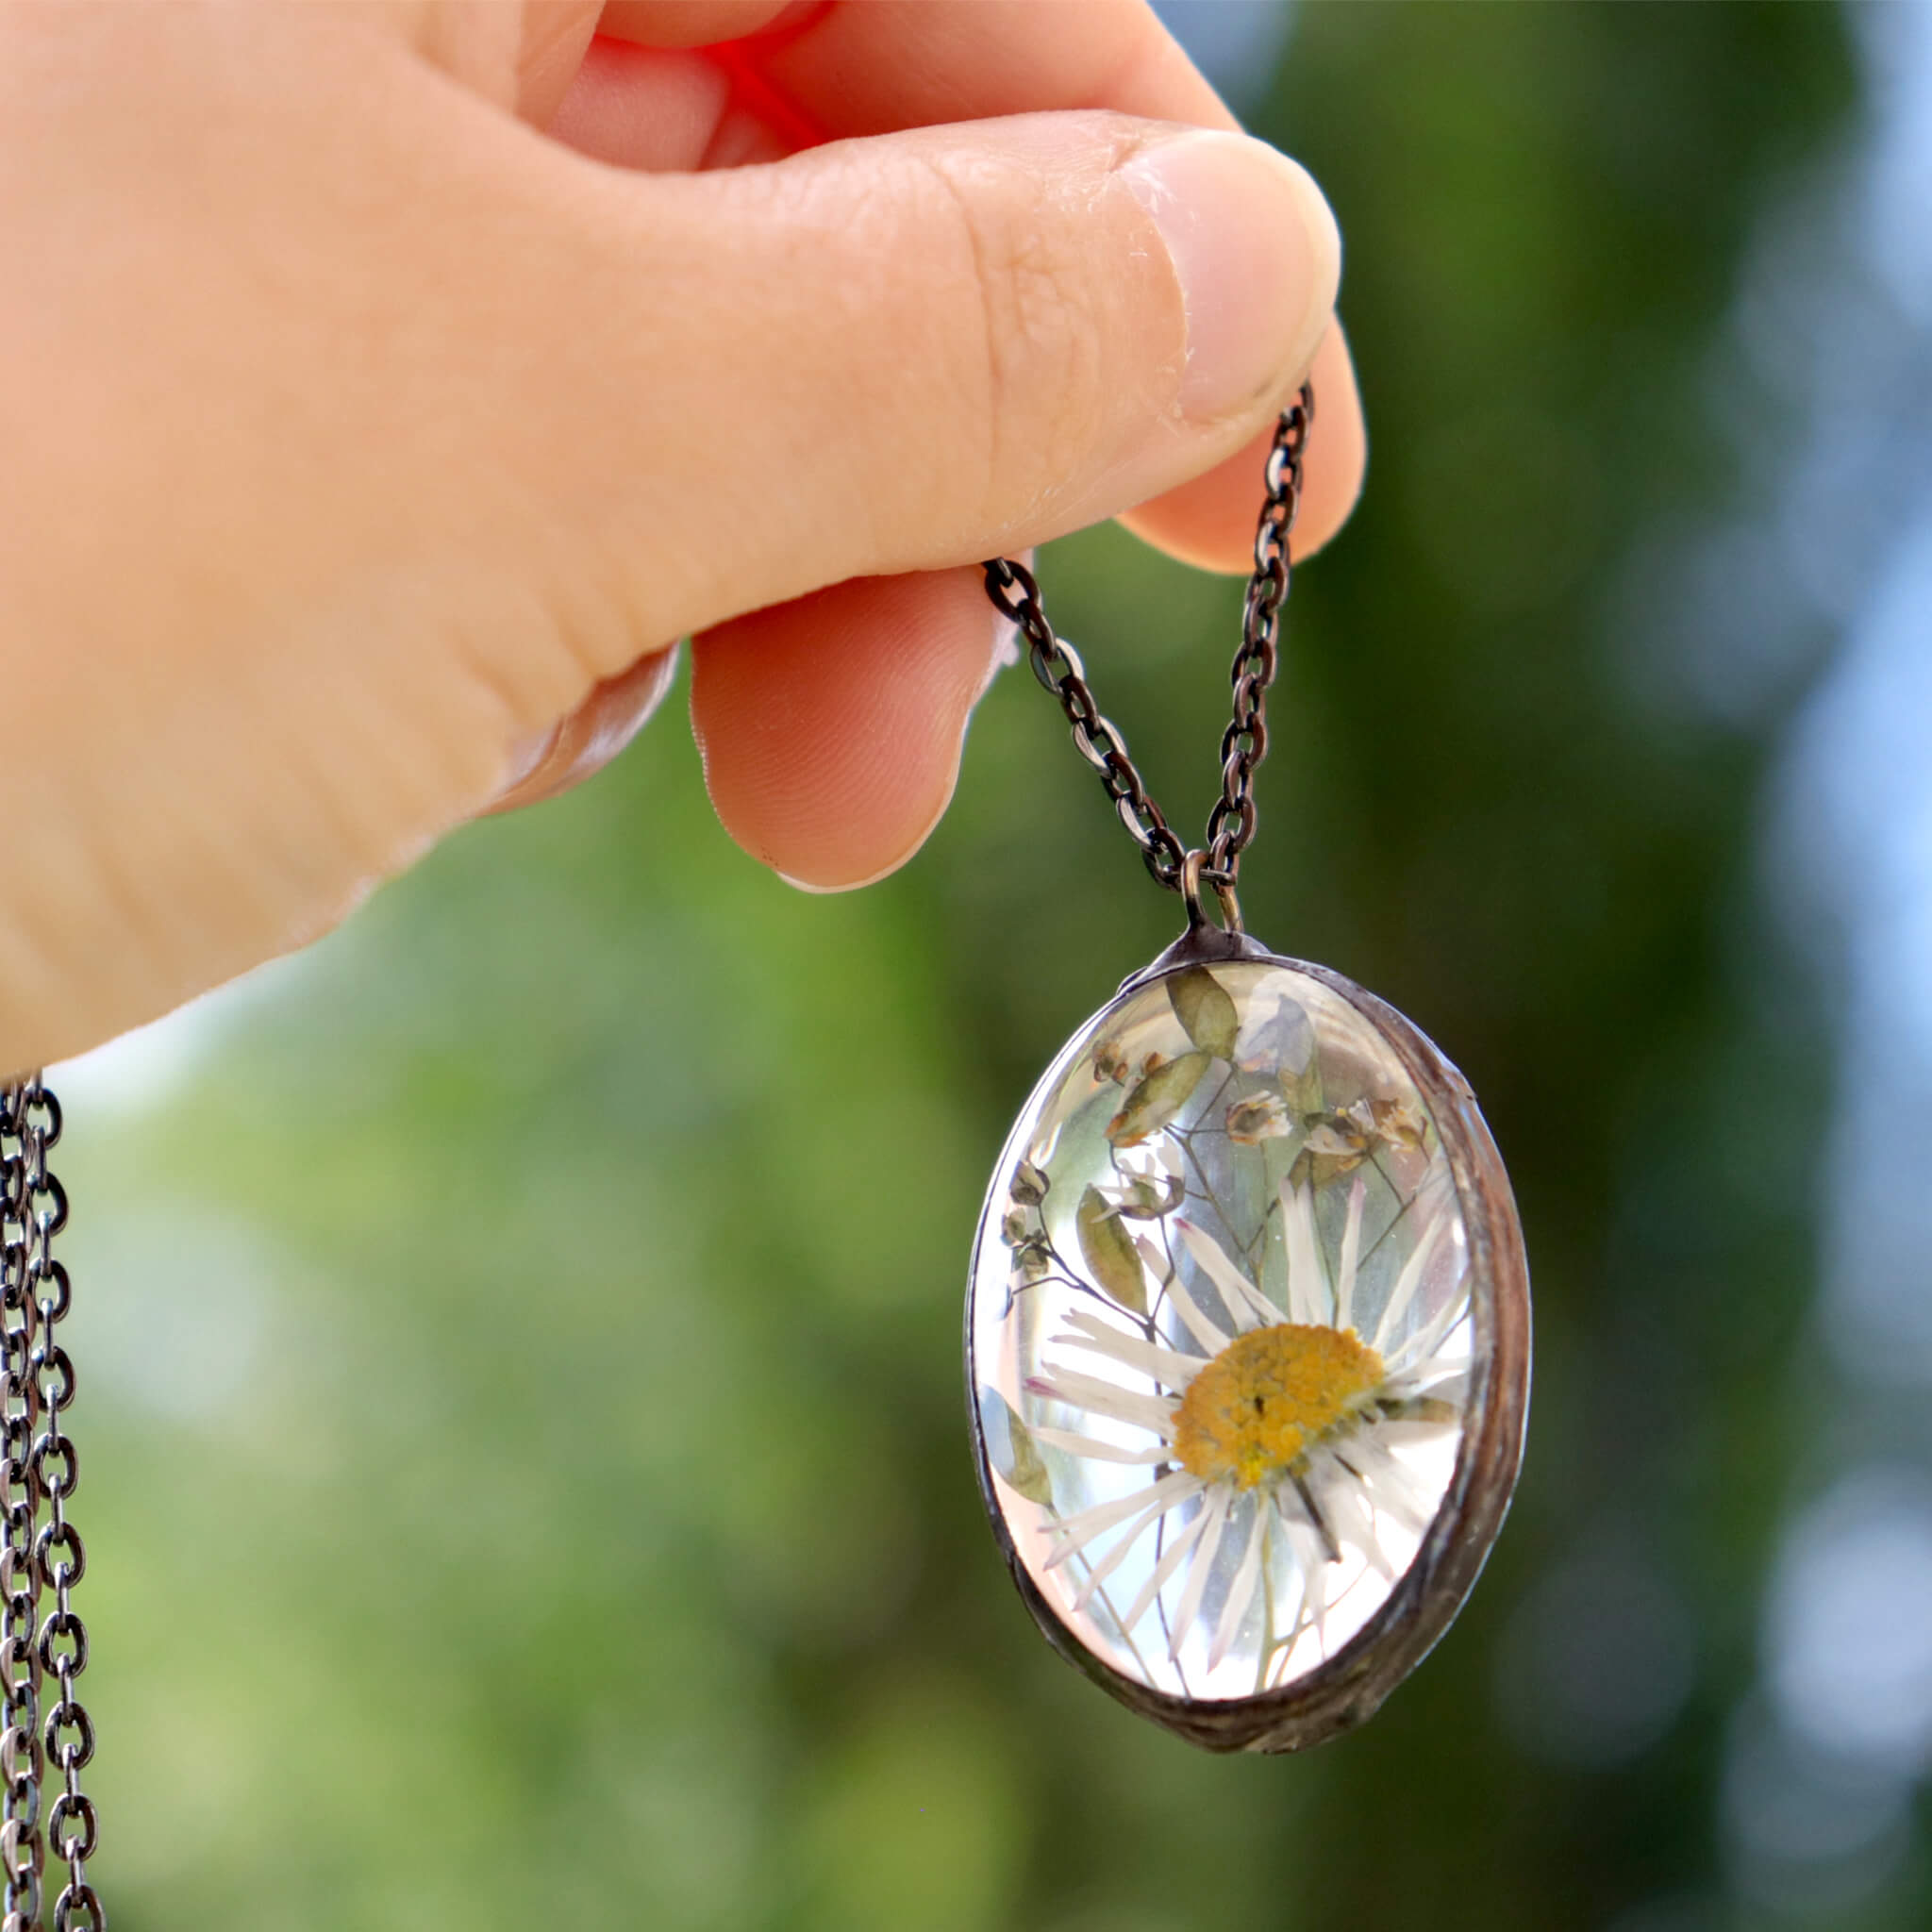 Hand holding oval glass soldered necklace with pressed daisy inside on a green background